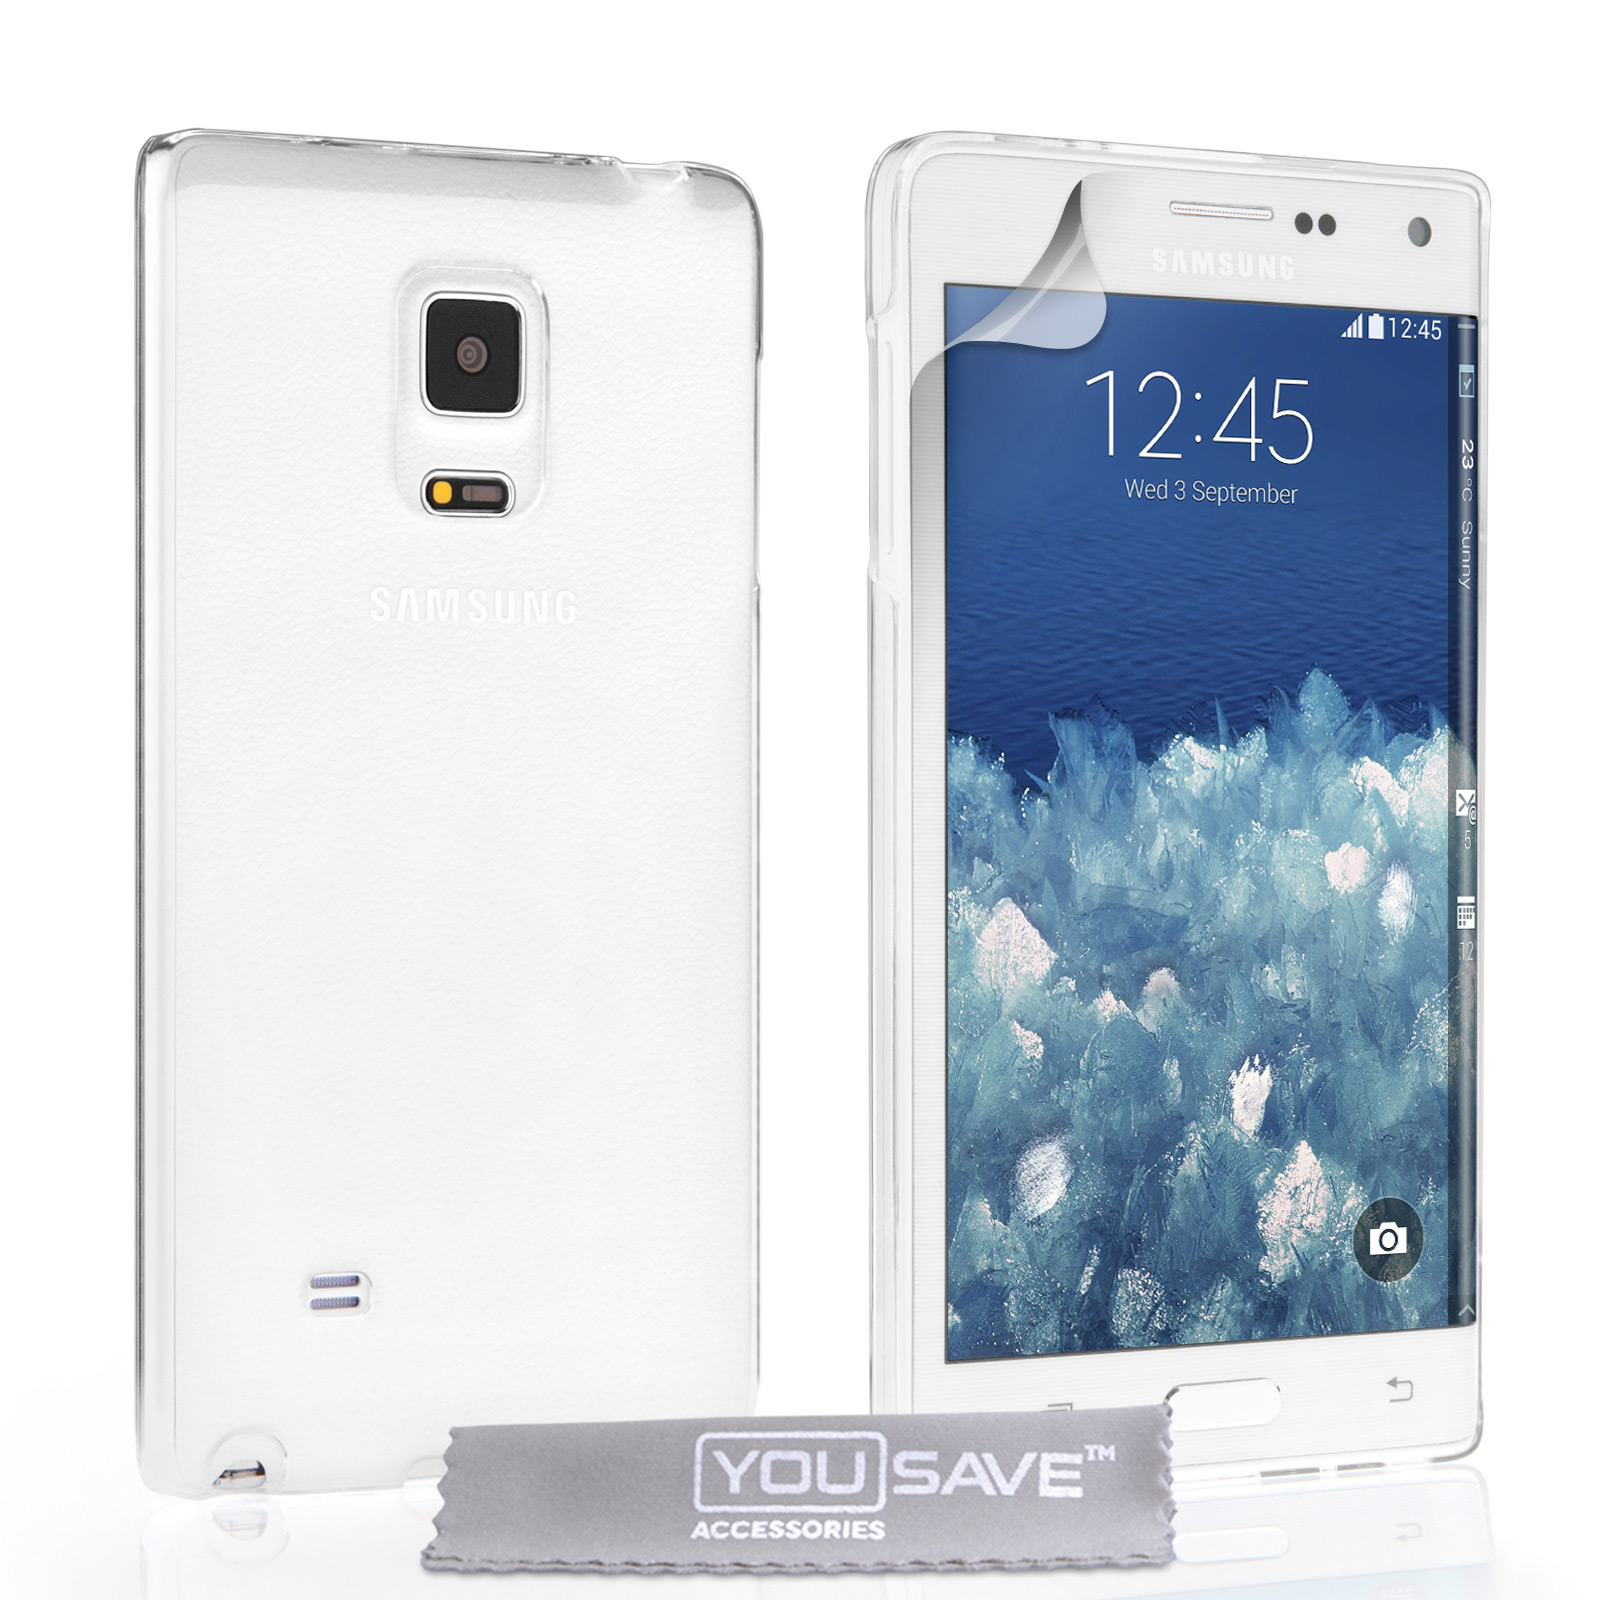 YouSave Accessories Samsung Galaxy Note Edge Hard Case - Crystal Clear